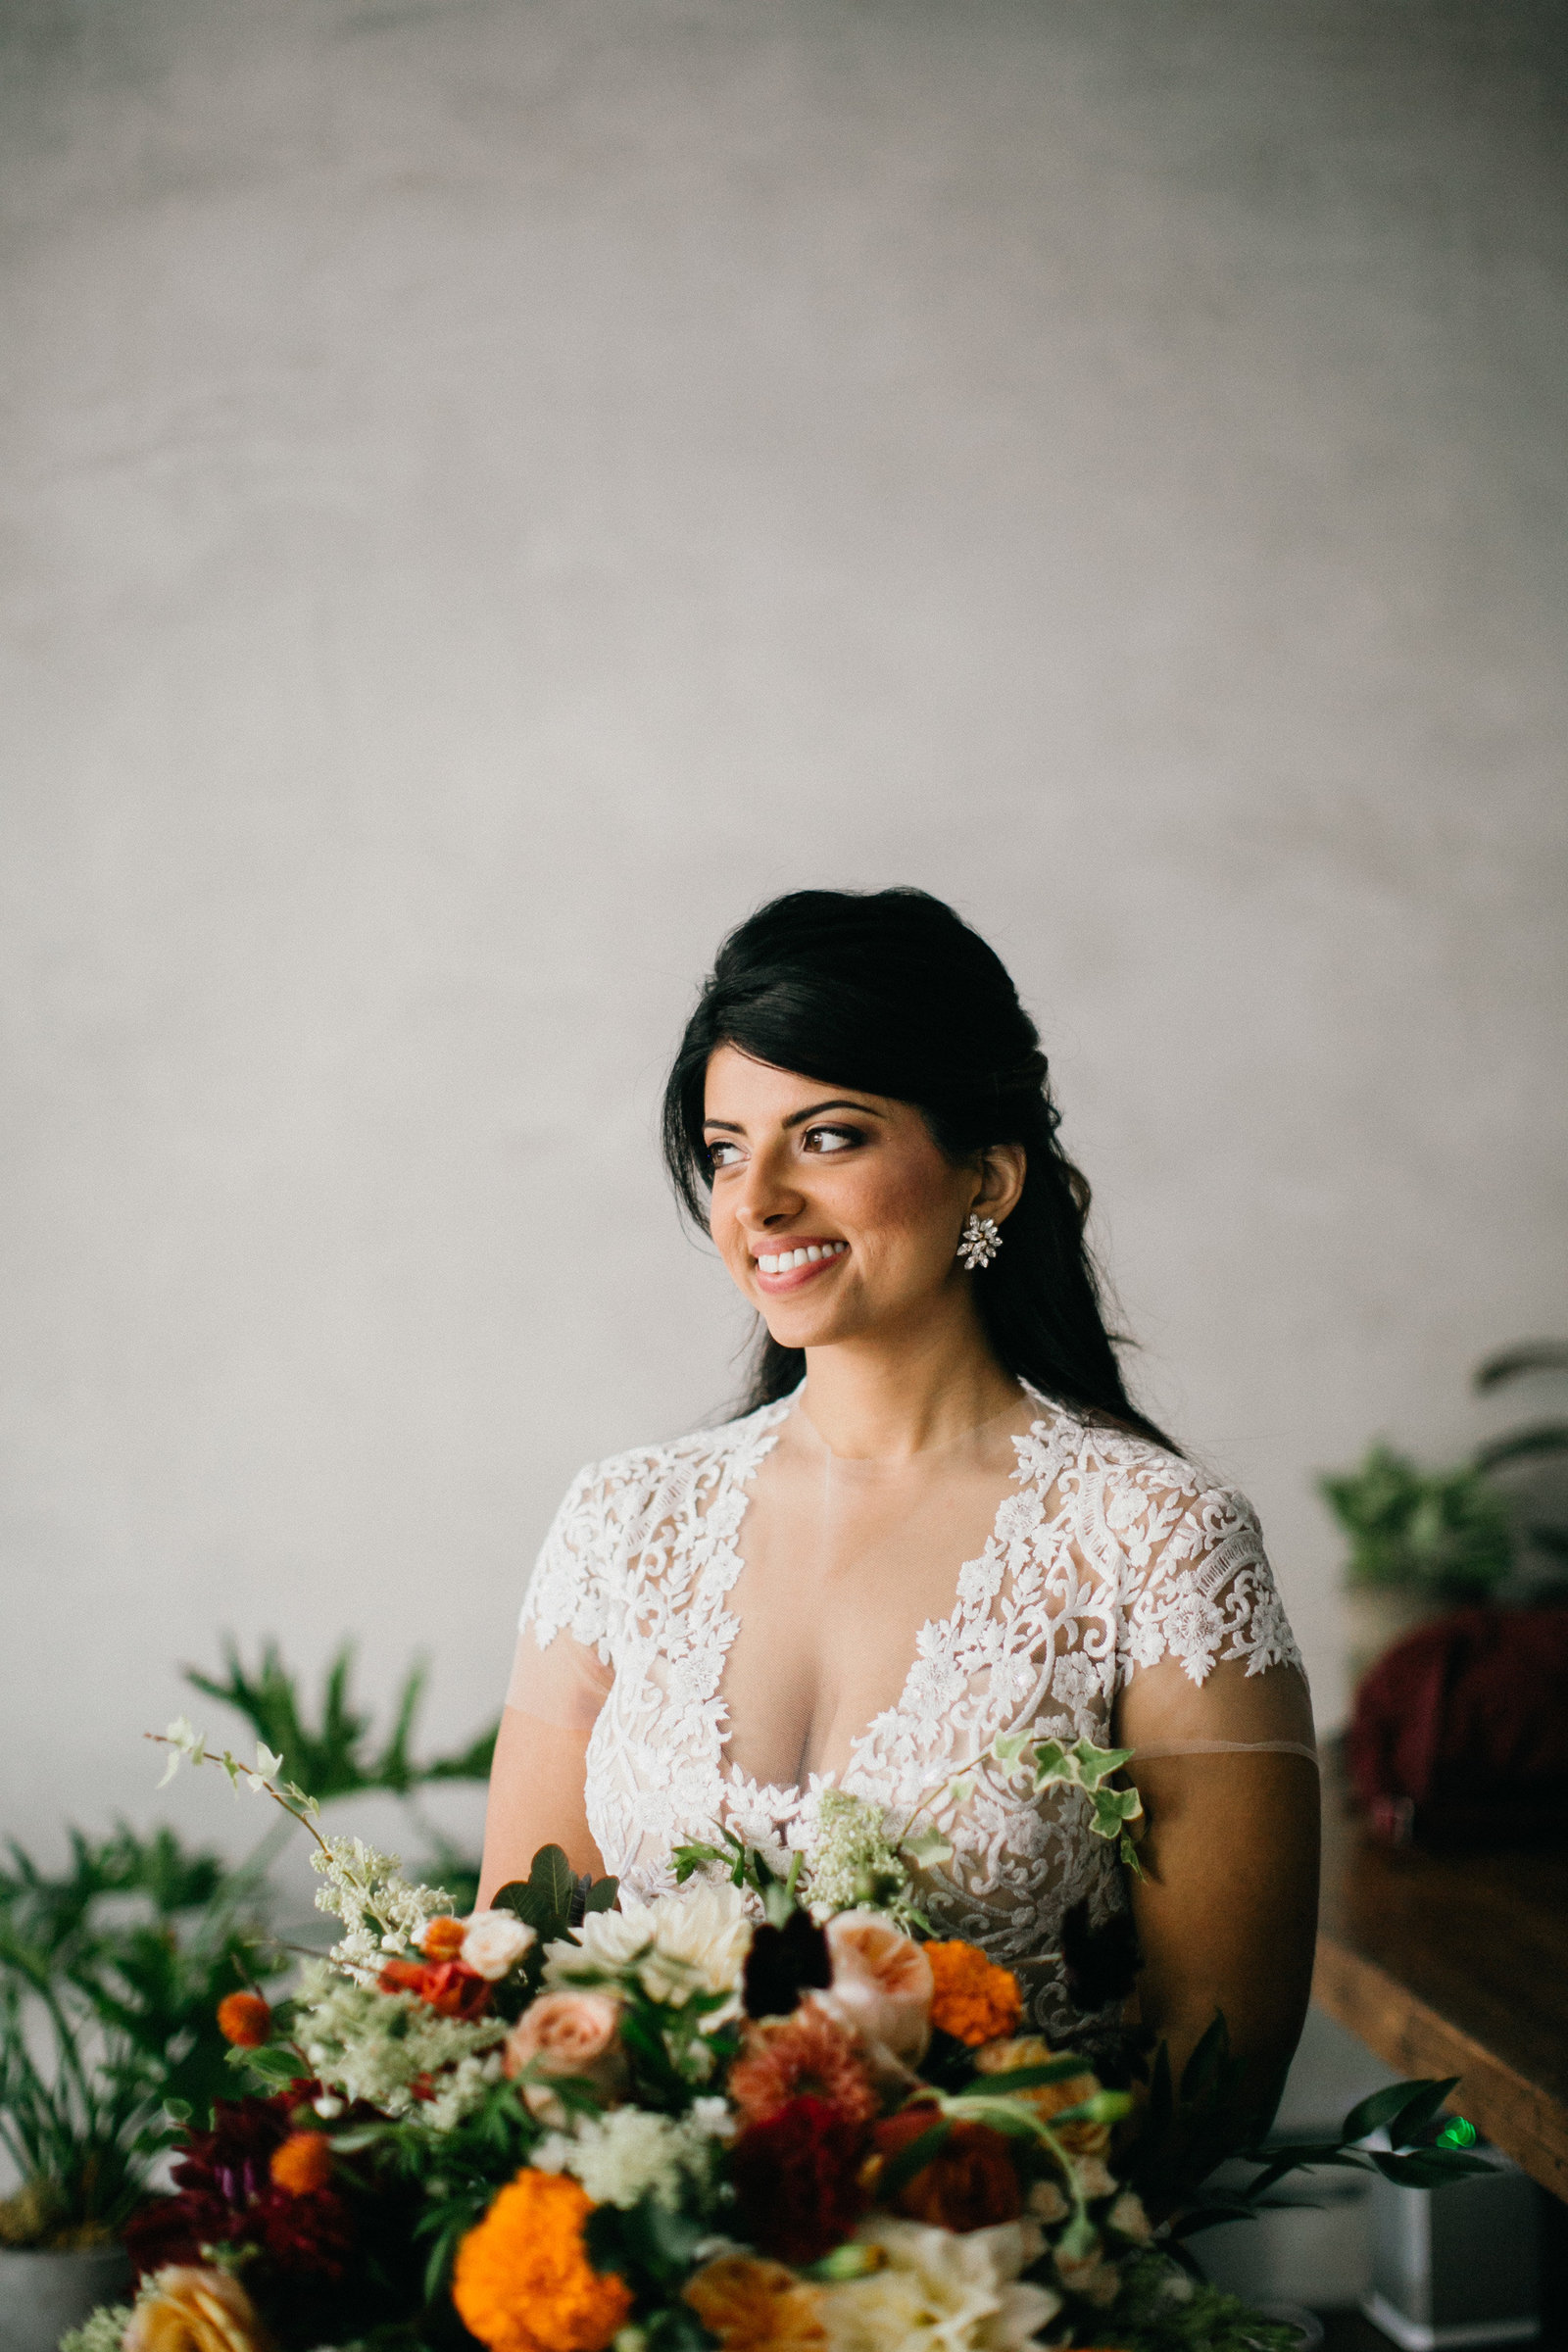 Radiant bride photographed with her big and beautiful floral bouquet in Lokal Hotel.